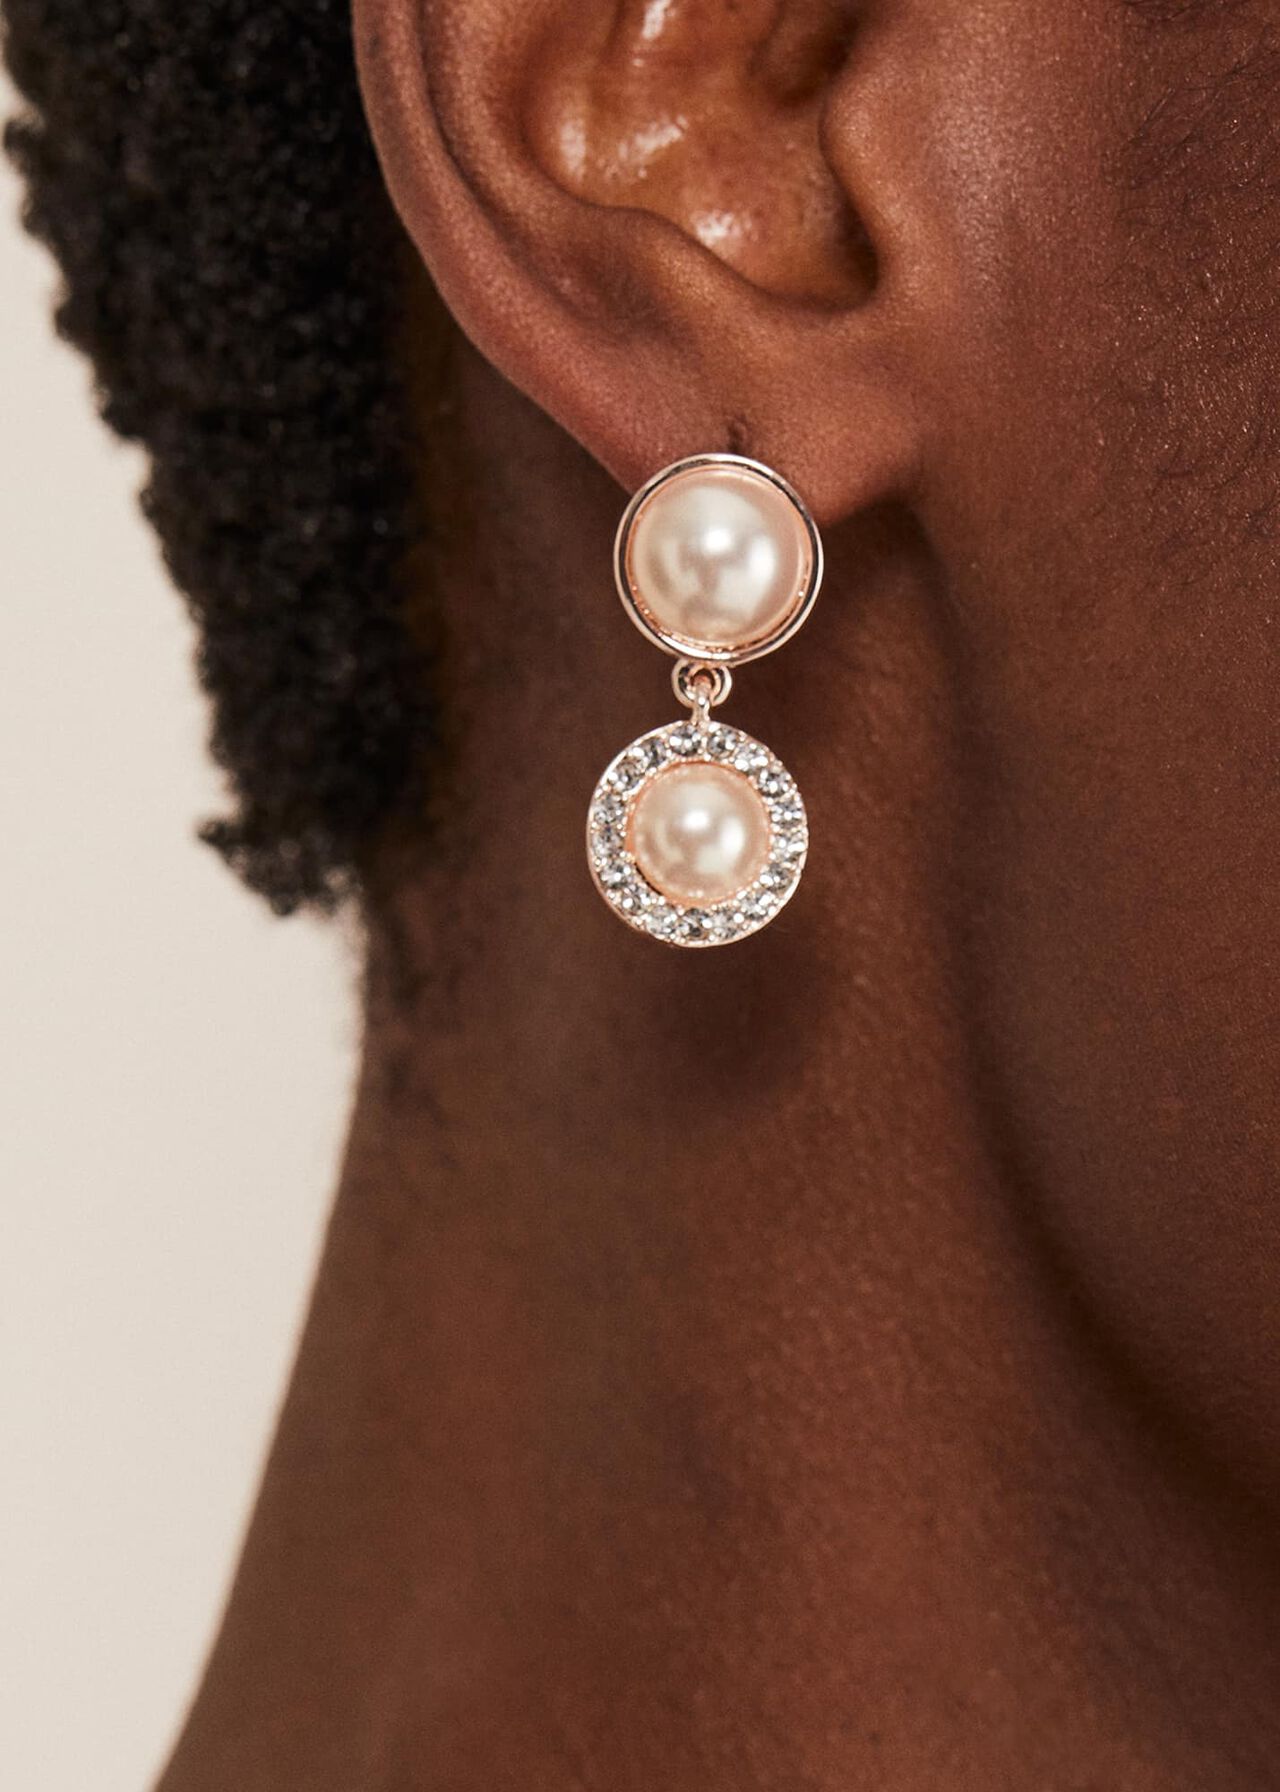 Pearl And Stone Drop Earrings